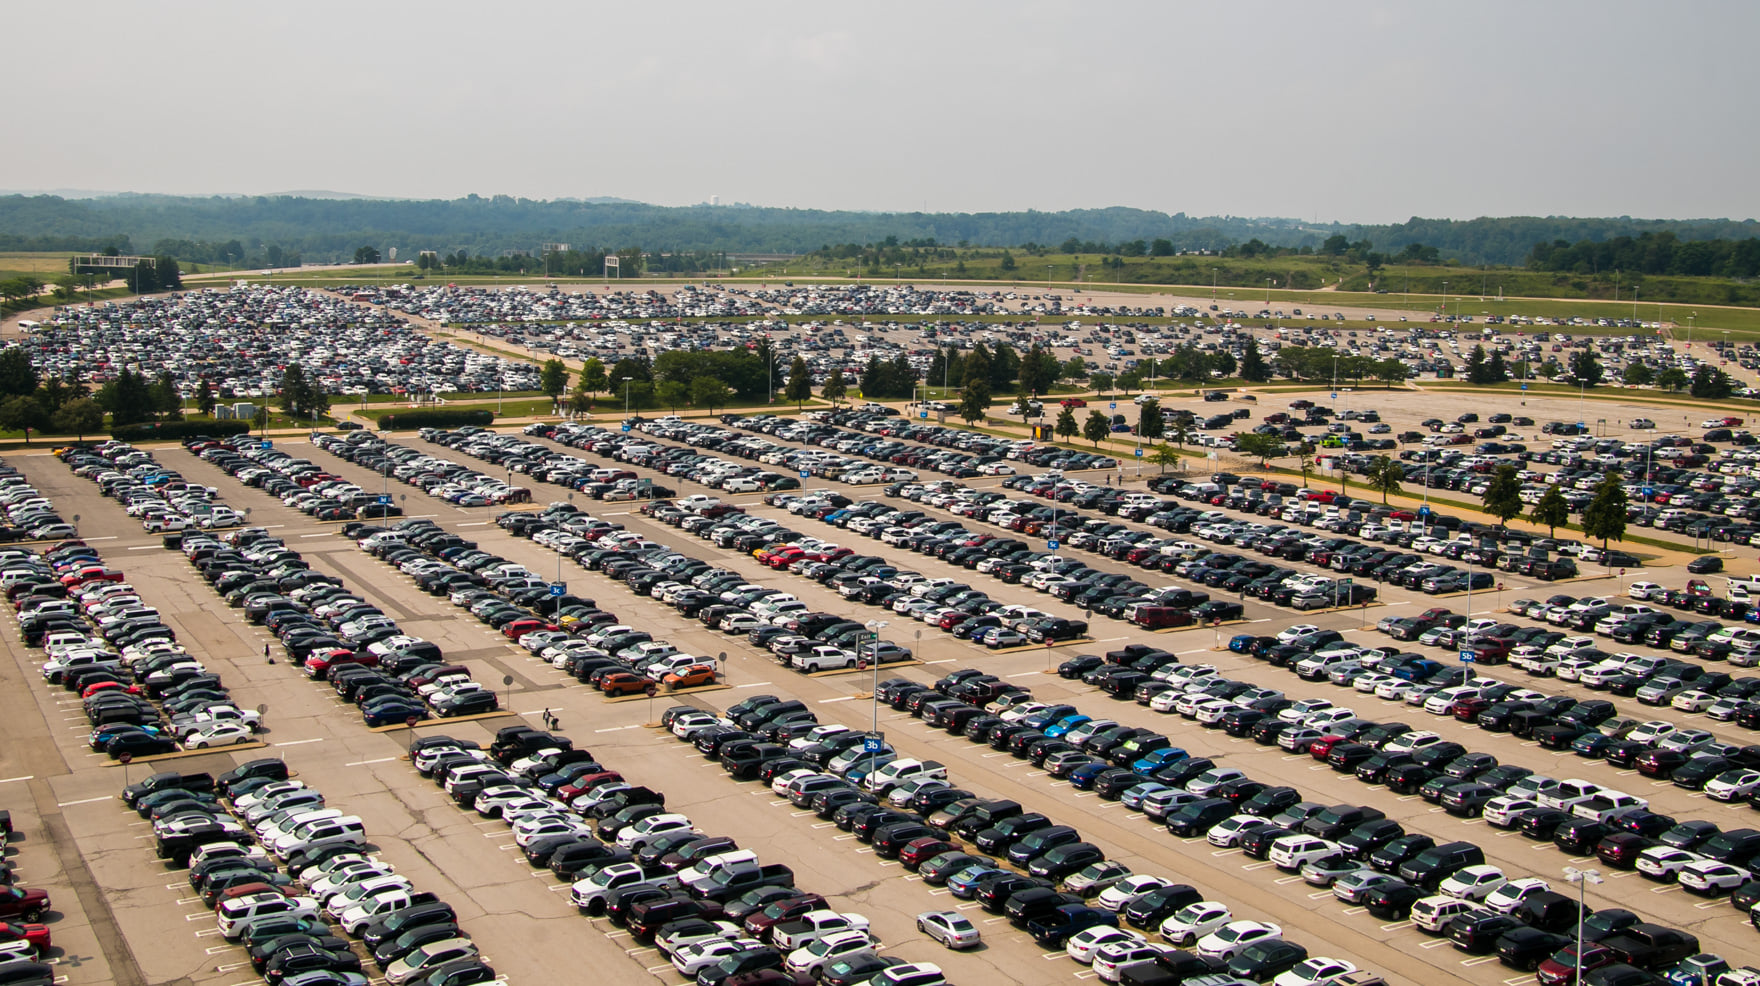 Guarantee a spot in your chosen lot Reserve your parking online